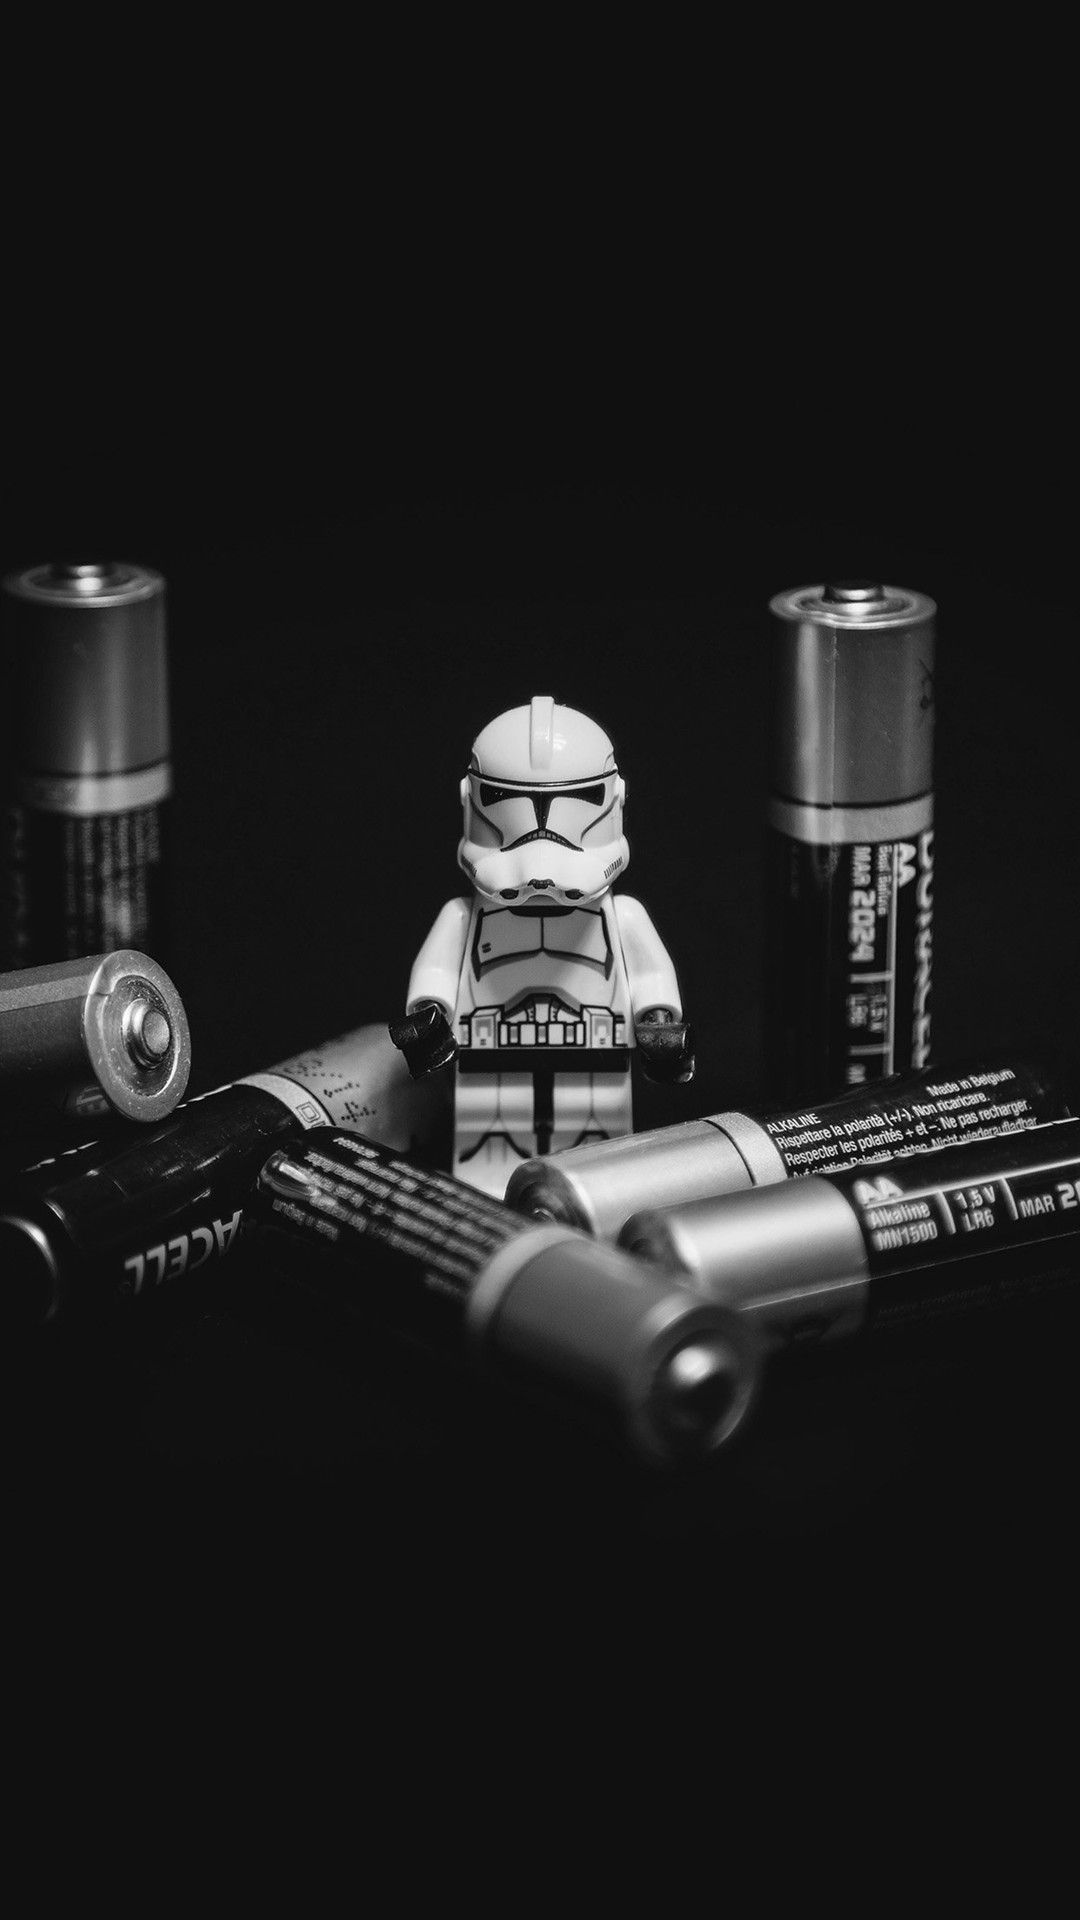 HD wallpaper white and black Star Wars LEGO action figure on the edge of  the table  Wallpaper Flare